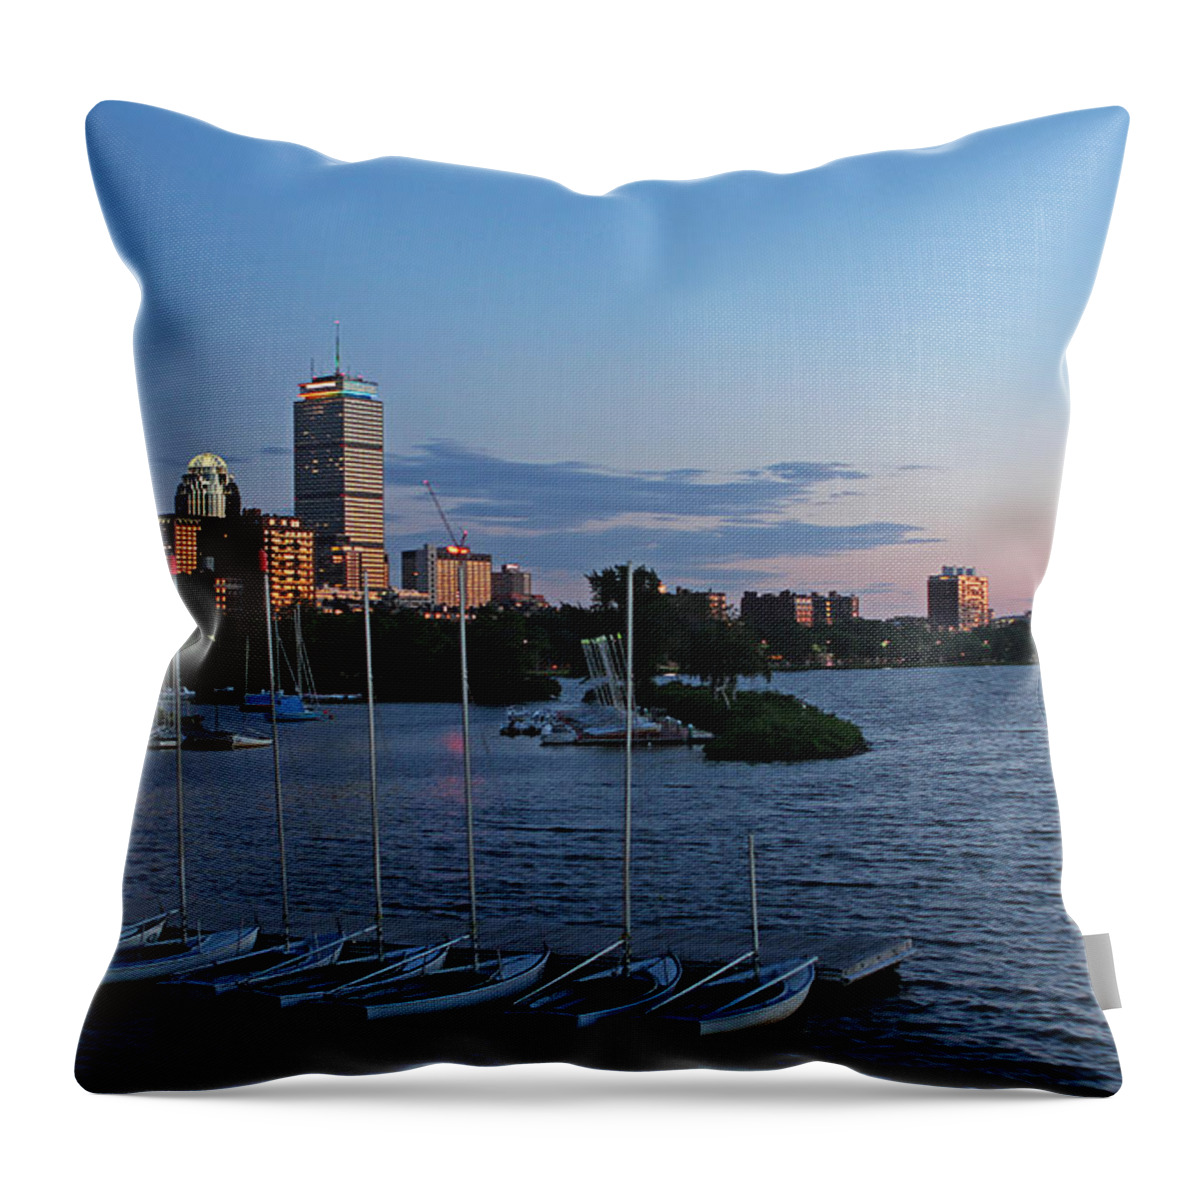 Boston Pride Throw Pillow featuring the photograph Prudential Center lit in Rainbow Colors by Juergen Roth